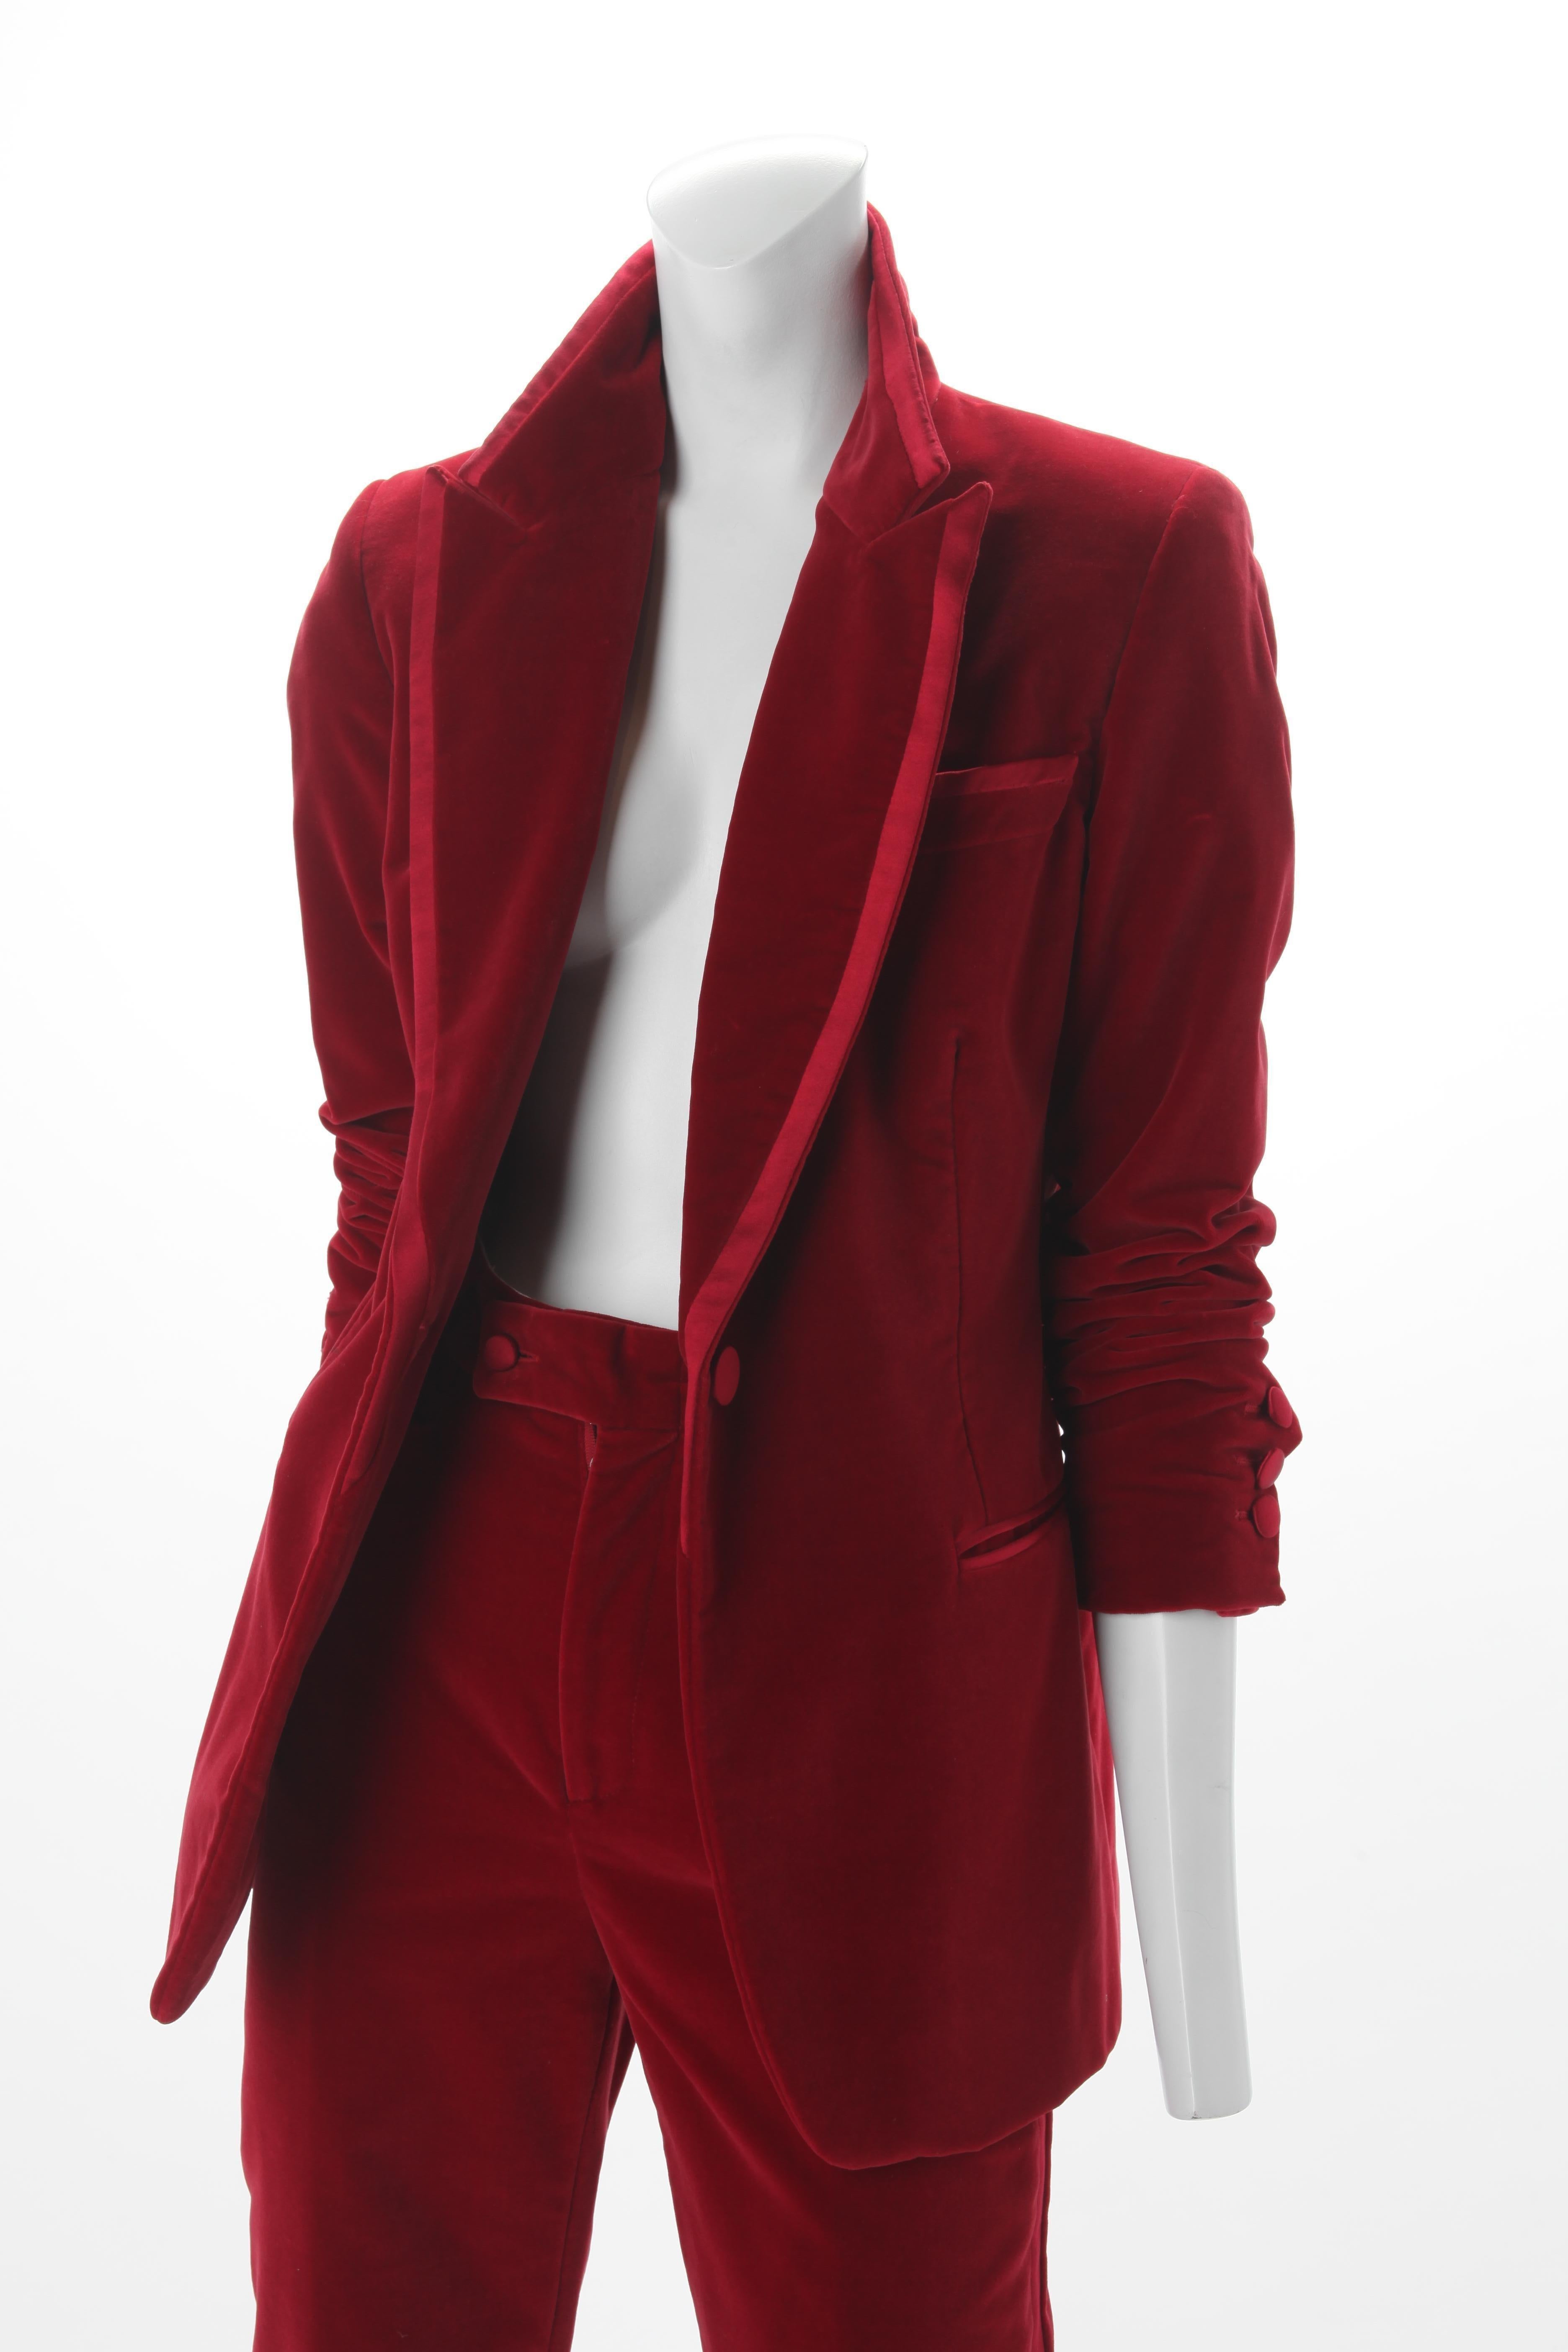 Tom Ford for Gucci Iconic Red Velvet Tuxedo Suit, Autumn/Winter RTW 1996.
Tom Ford for Gucci, Autumn-Winter 1996, red cotton velvet Tuxedo Suit. Jacket features dual welt pockets at waist, slit pocket at bust, contrast panel at collar and single